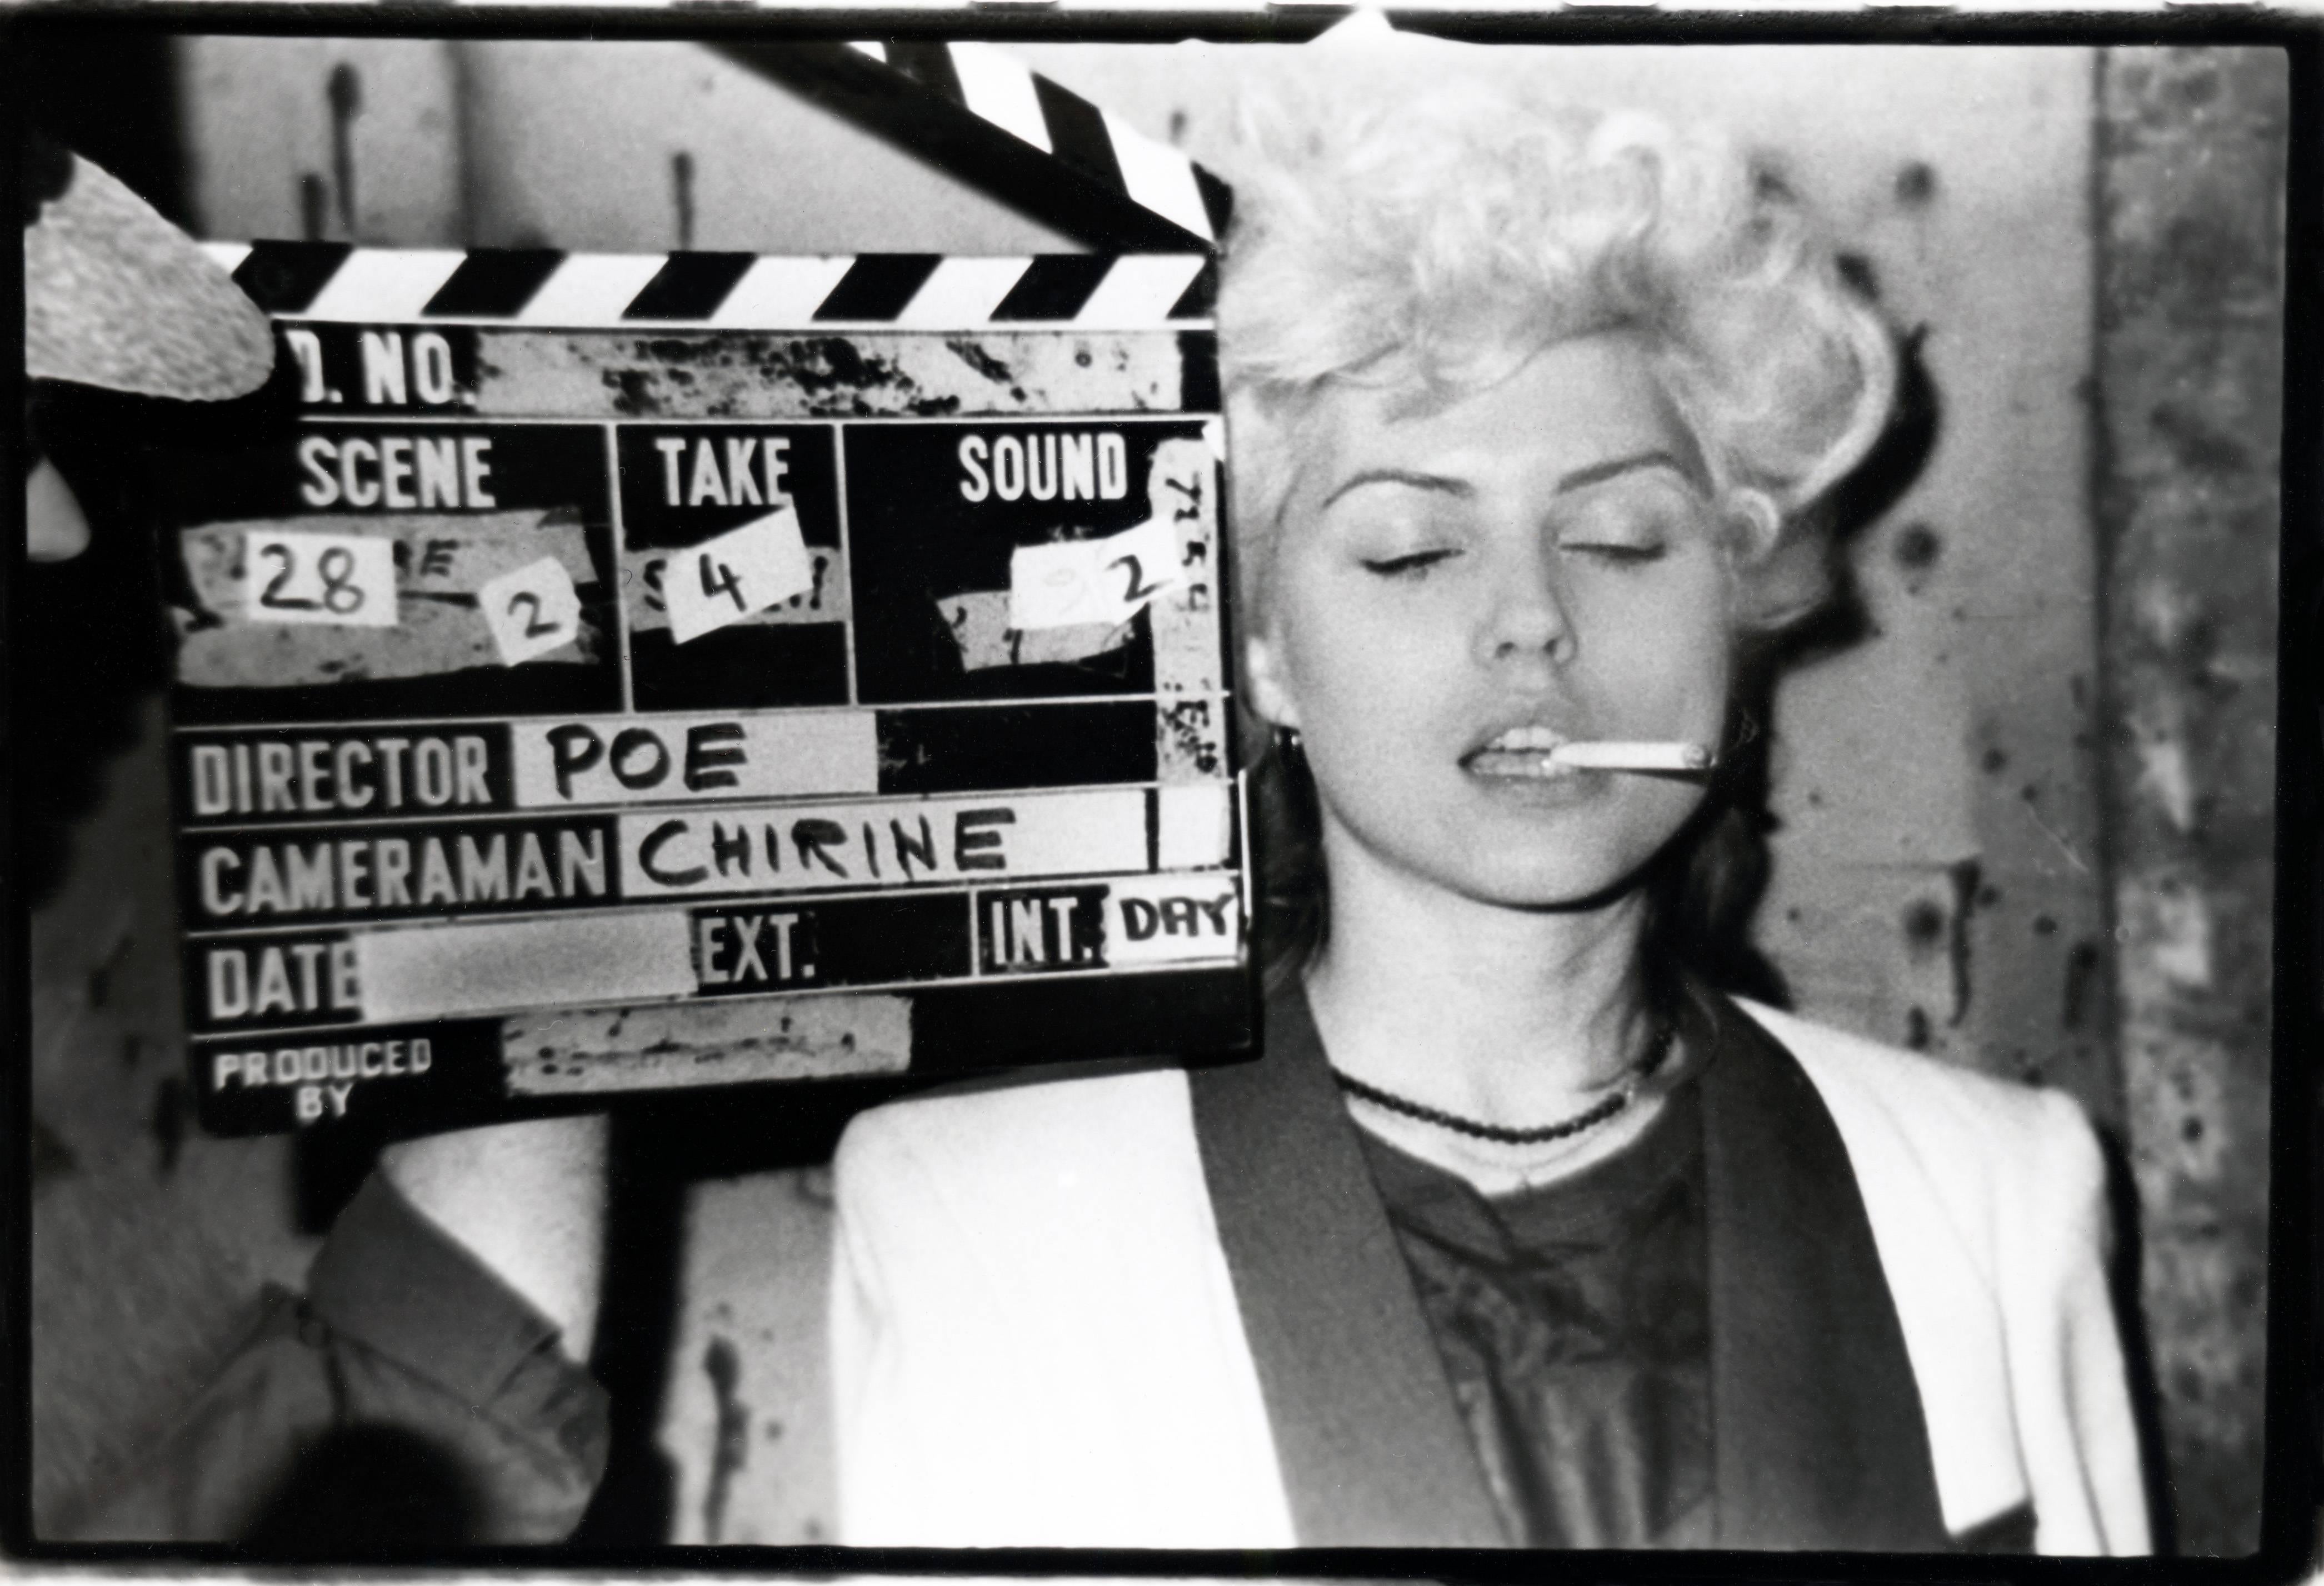 Fernando Natalici Black and White Photograph - Debbie Harry on the set of The Foreigner East Village, 1977 (Blondie) 